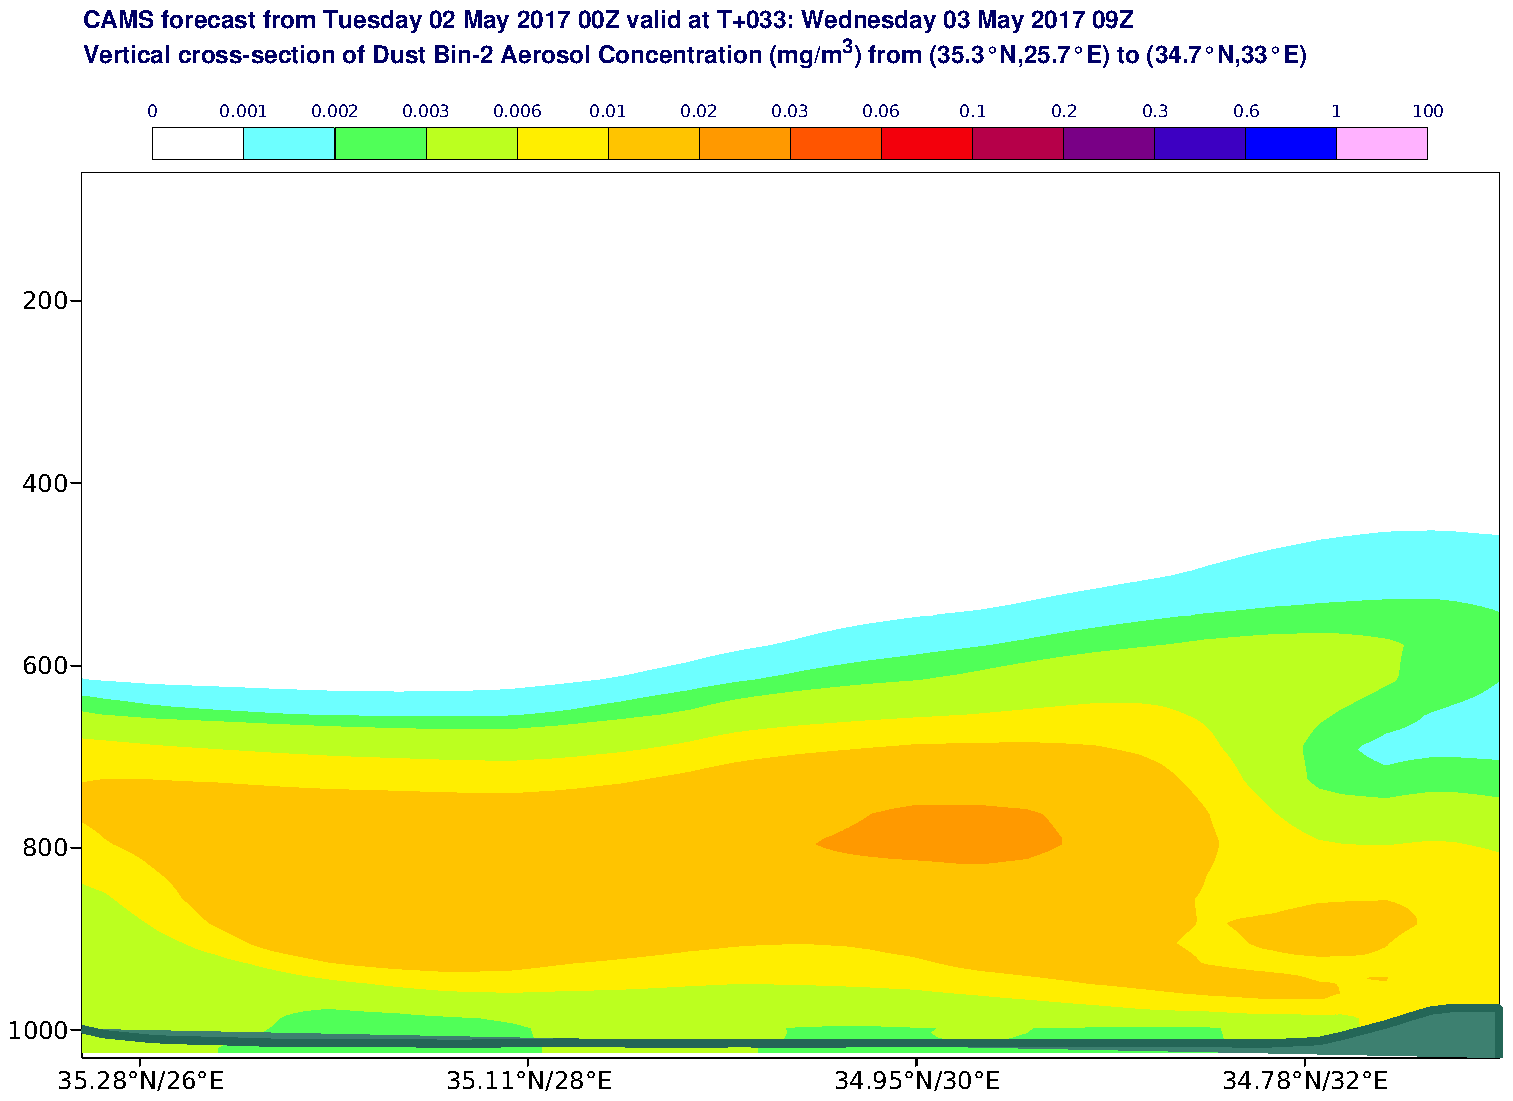 Vertical cross-section of Dust Bin-2 Aerosol Concentration (mg/m3) valid at T33 - 2017-05-03 09:00